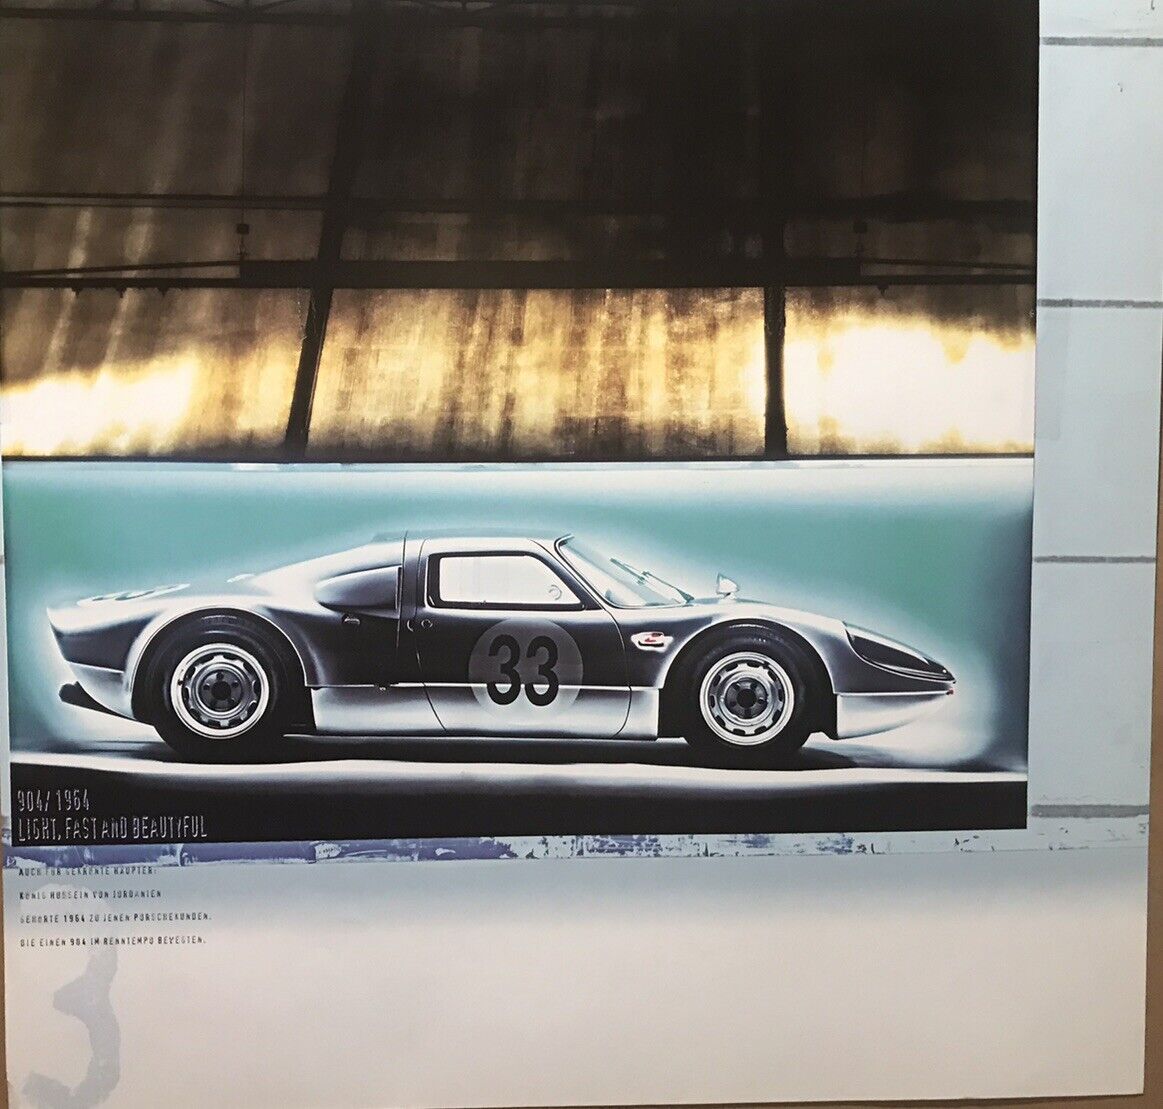 Porsche 904/ 1964 Porsche Ag Car Poster Extremely Rare 1 Only Own It Beautiful